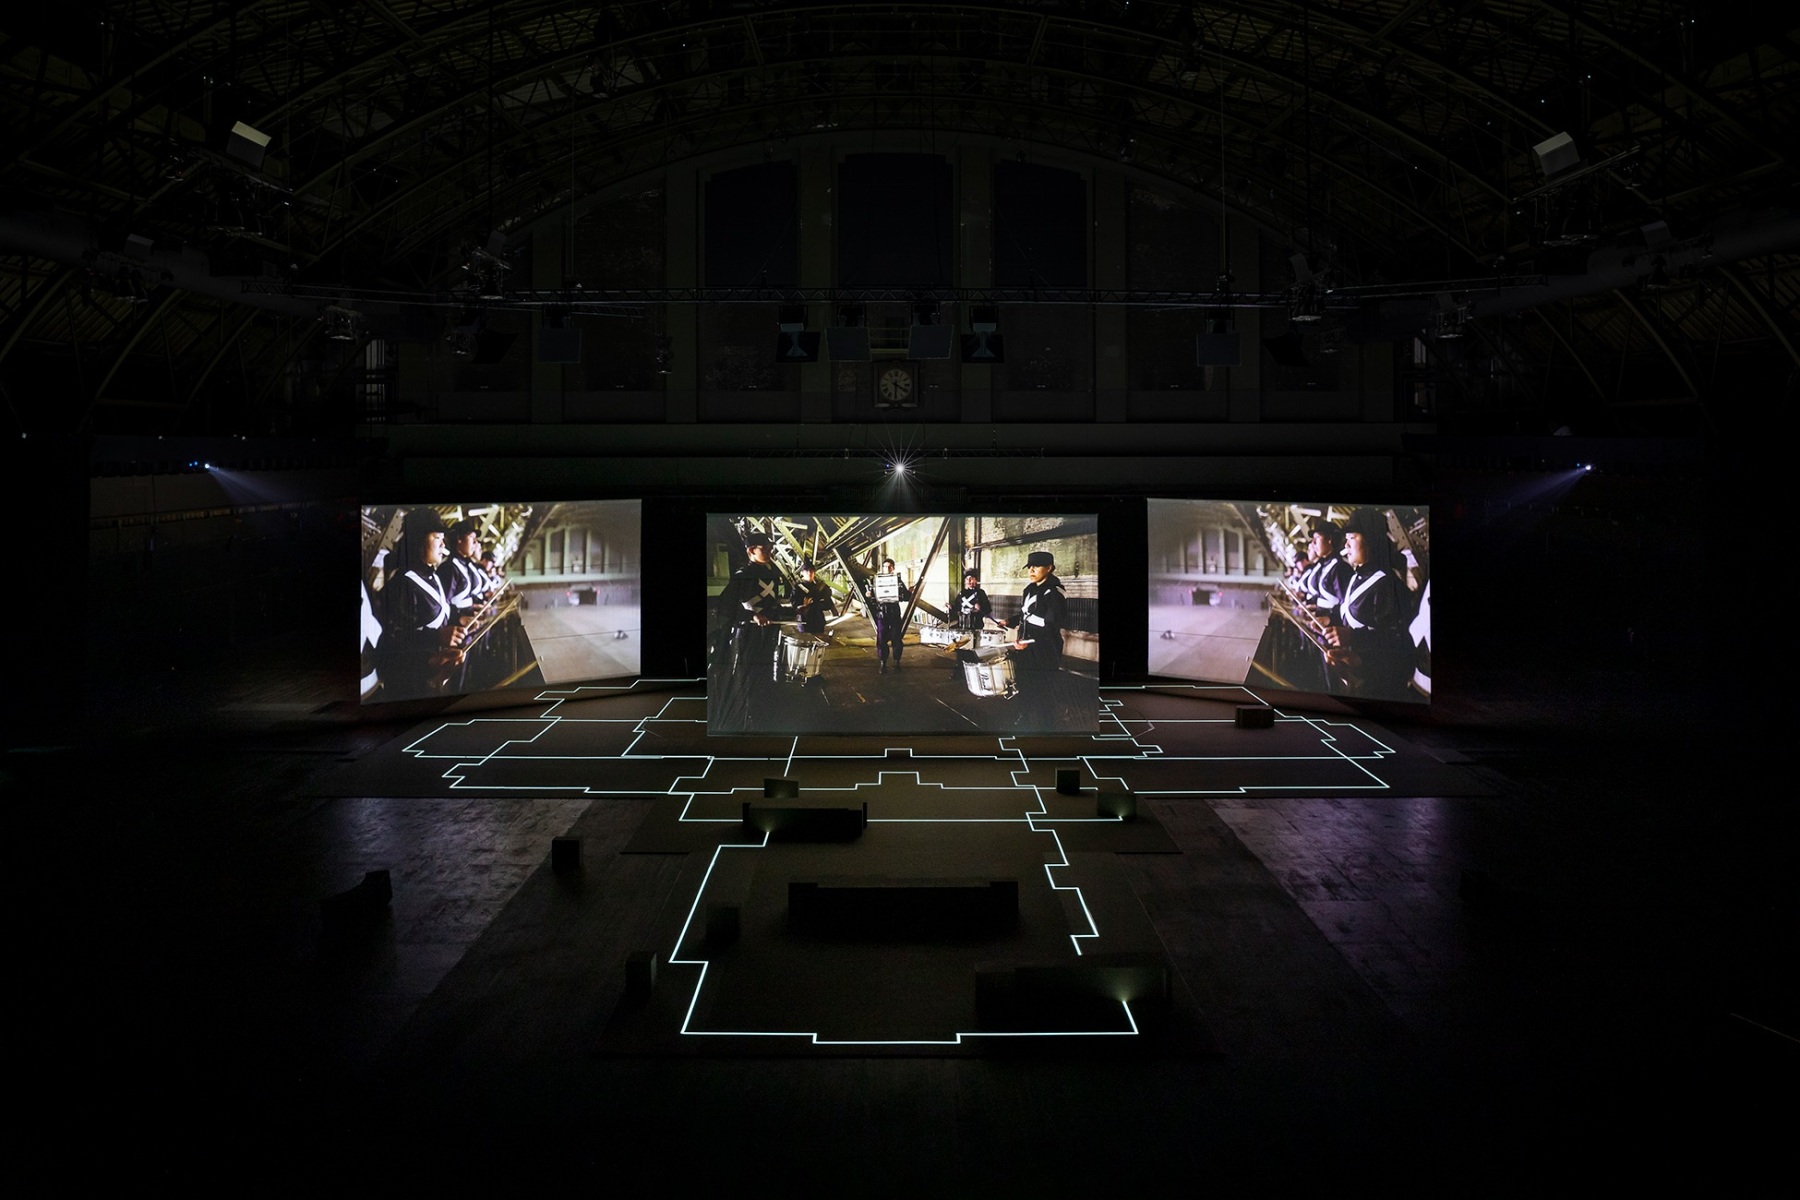 Hito Steyerl,&nbsp;Drill, June 21 - July 20, 2019,&nbsp;Park Avenue Armory, New York